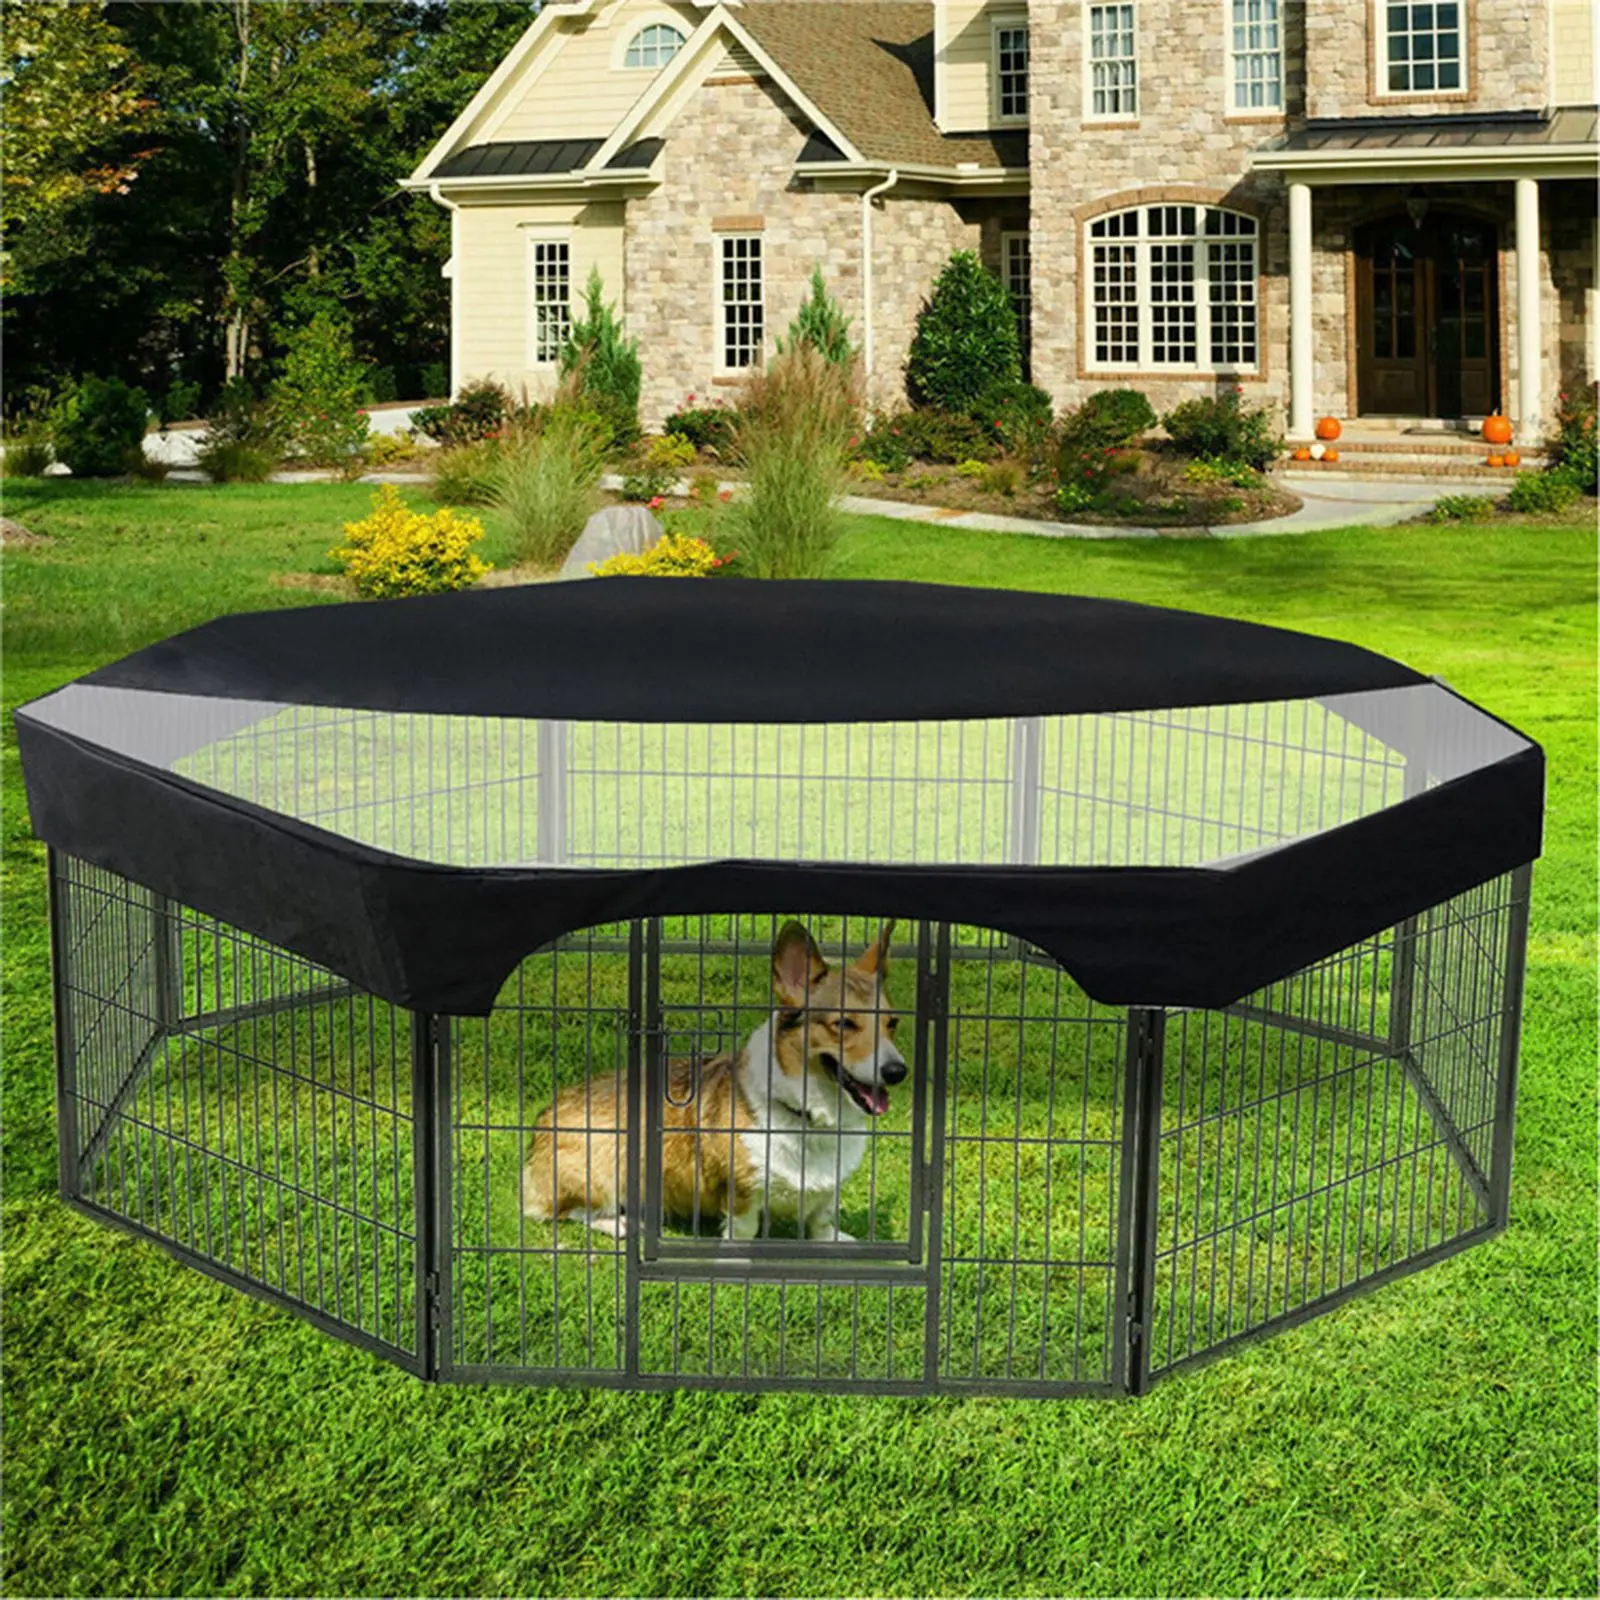 

24in Pet Cage Cover Large Dog Playpen Cover Sun Rain Proof For Indoor Outdoor 8 Panels Playpen Cover